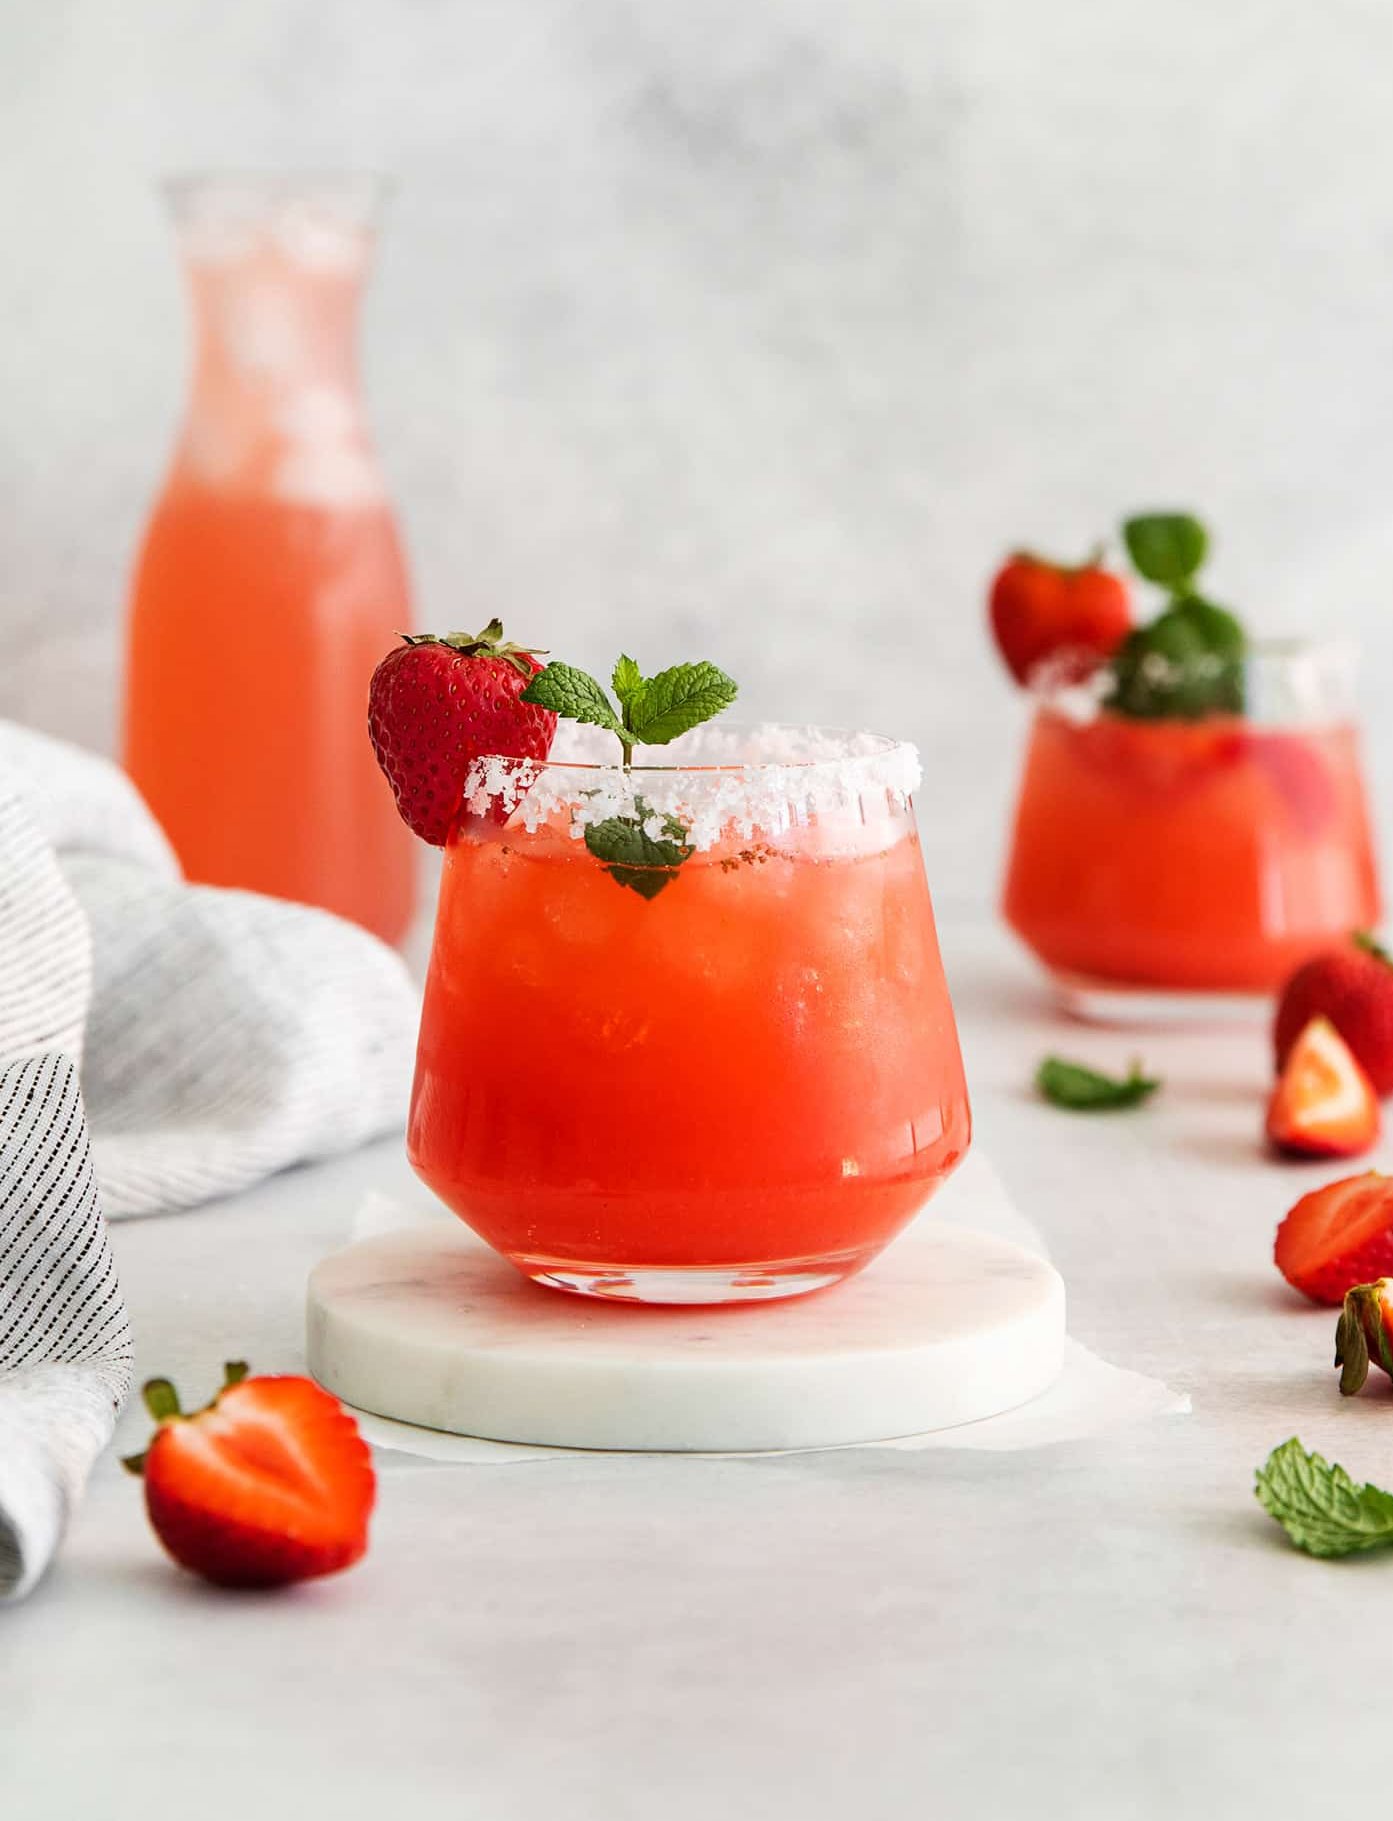 Glasses of a red drink garnished with strawberries and a pitcher in the background.